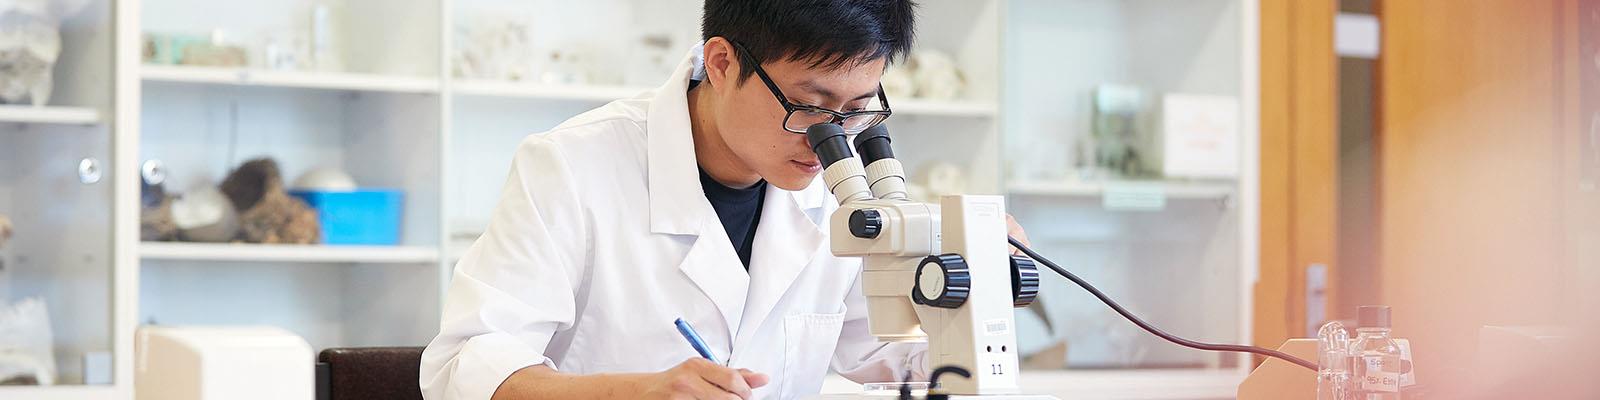 Science student examining item in microscope in a lab